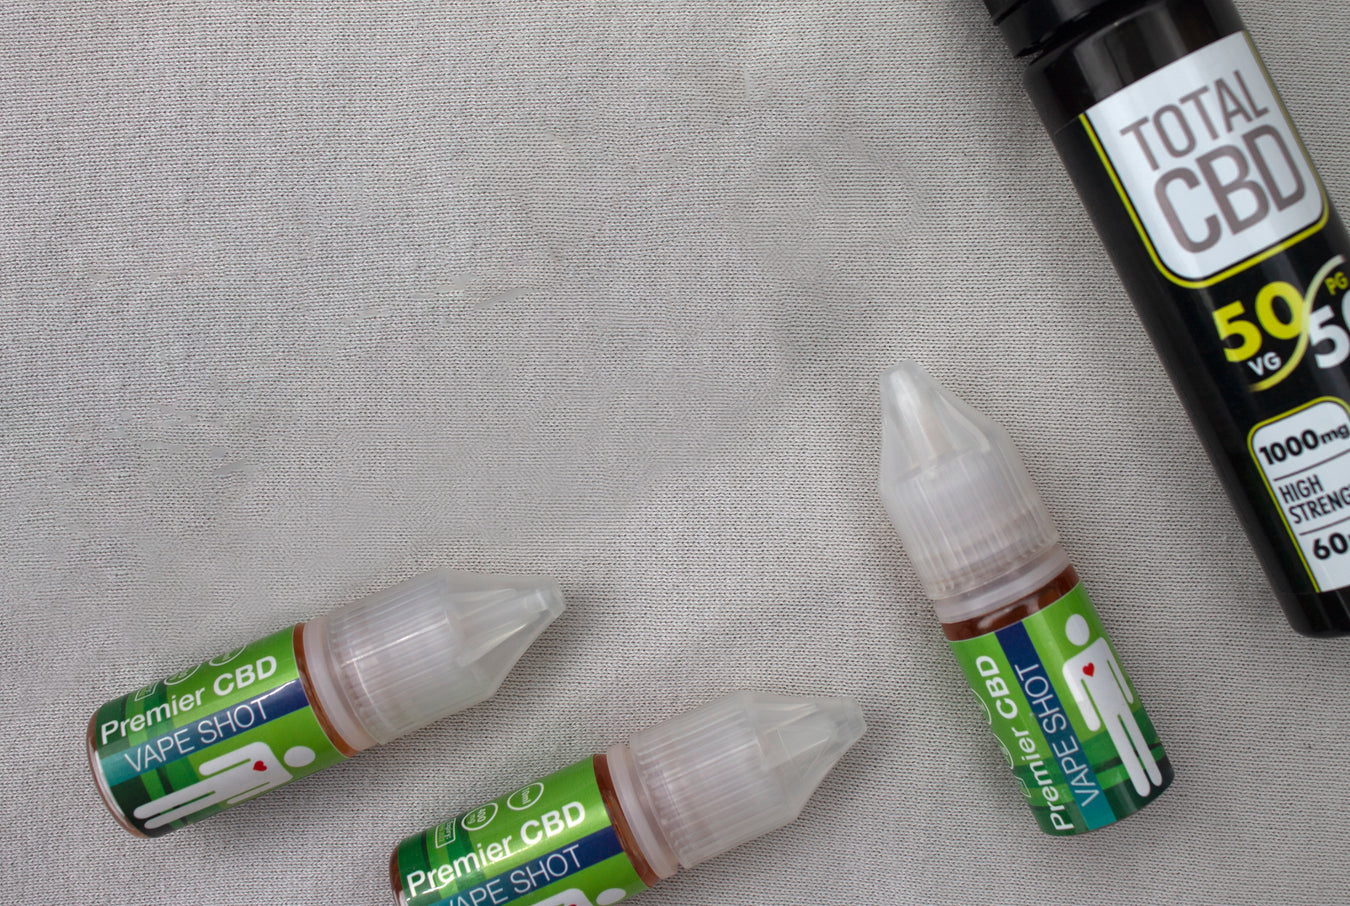 A number of CBD vape liquids laid out against a grey background